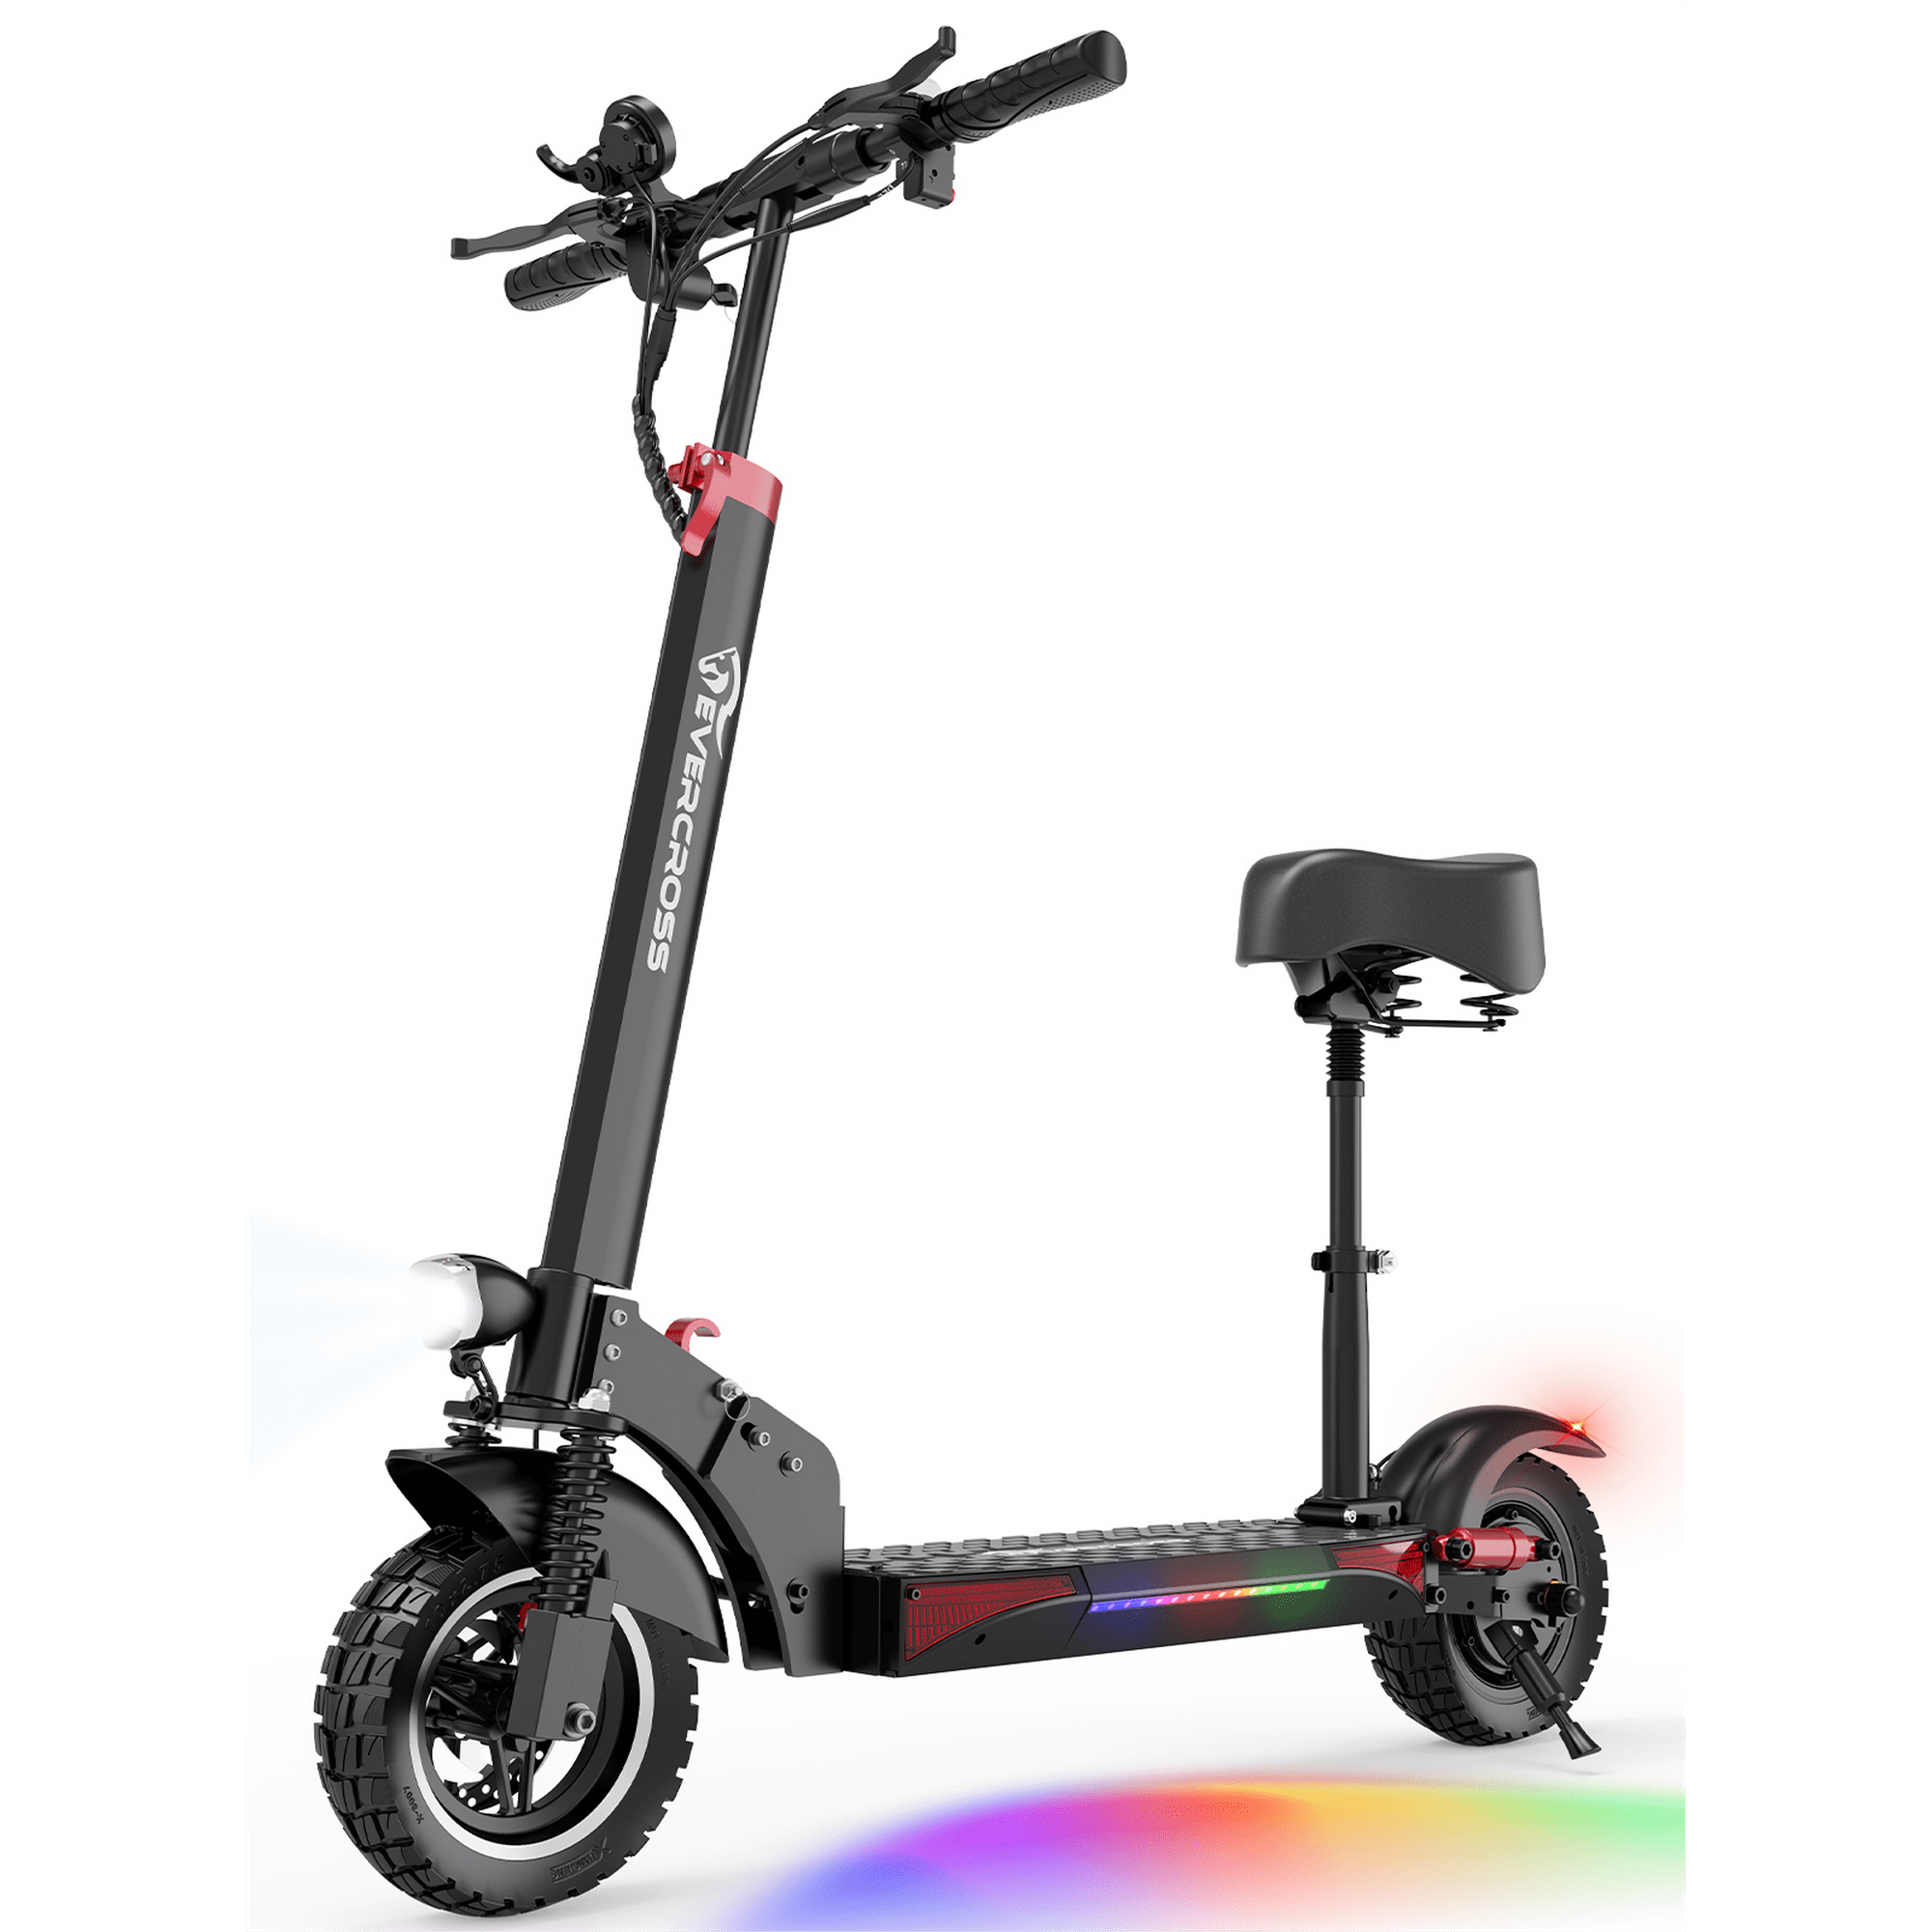 EVERCROSS 800W Folding Electric Scooter with 10″ Solid Tires, up to 28 MPH and 25 Miles Range